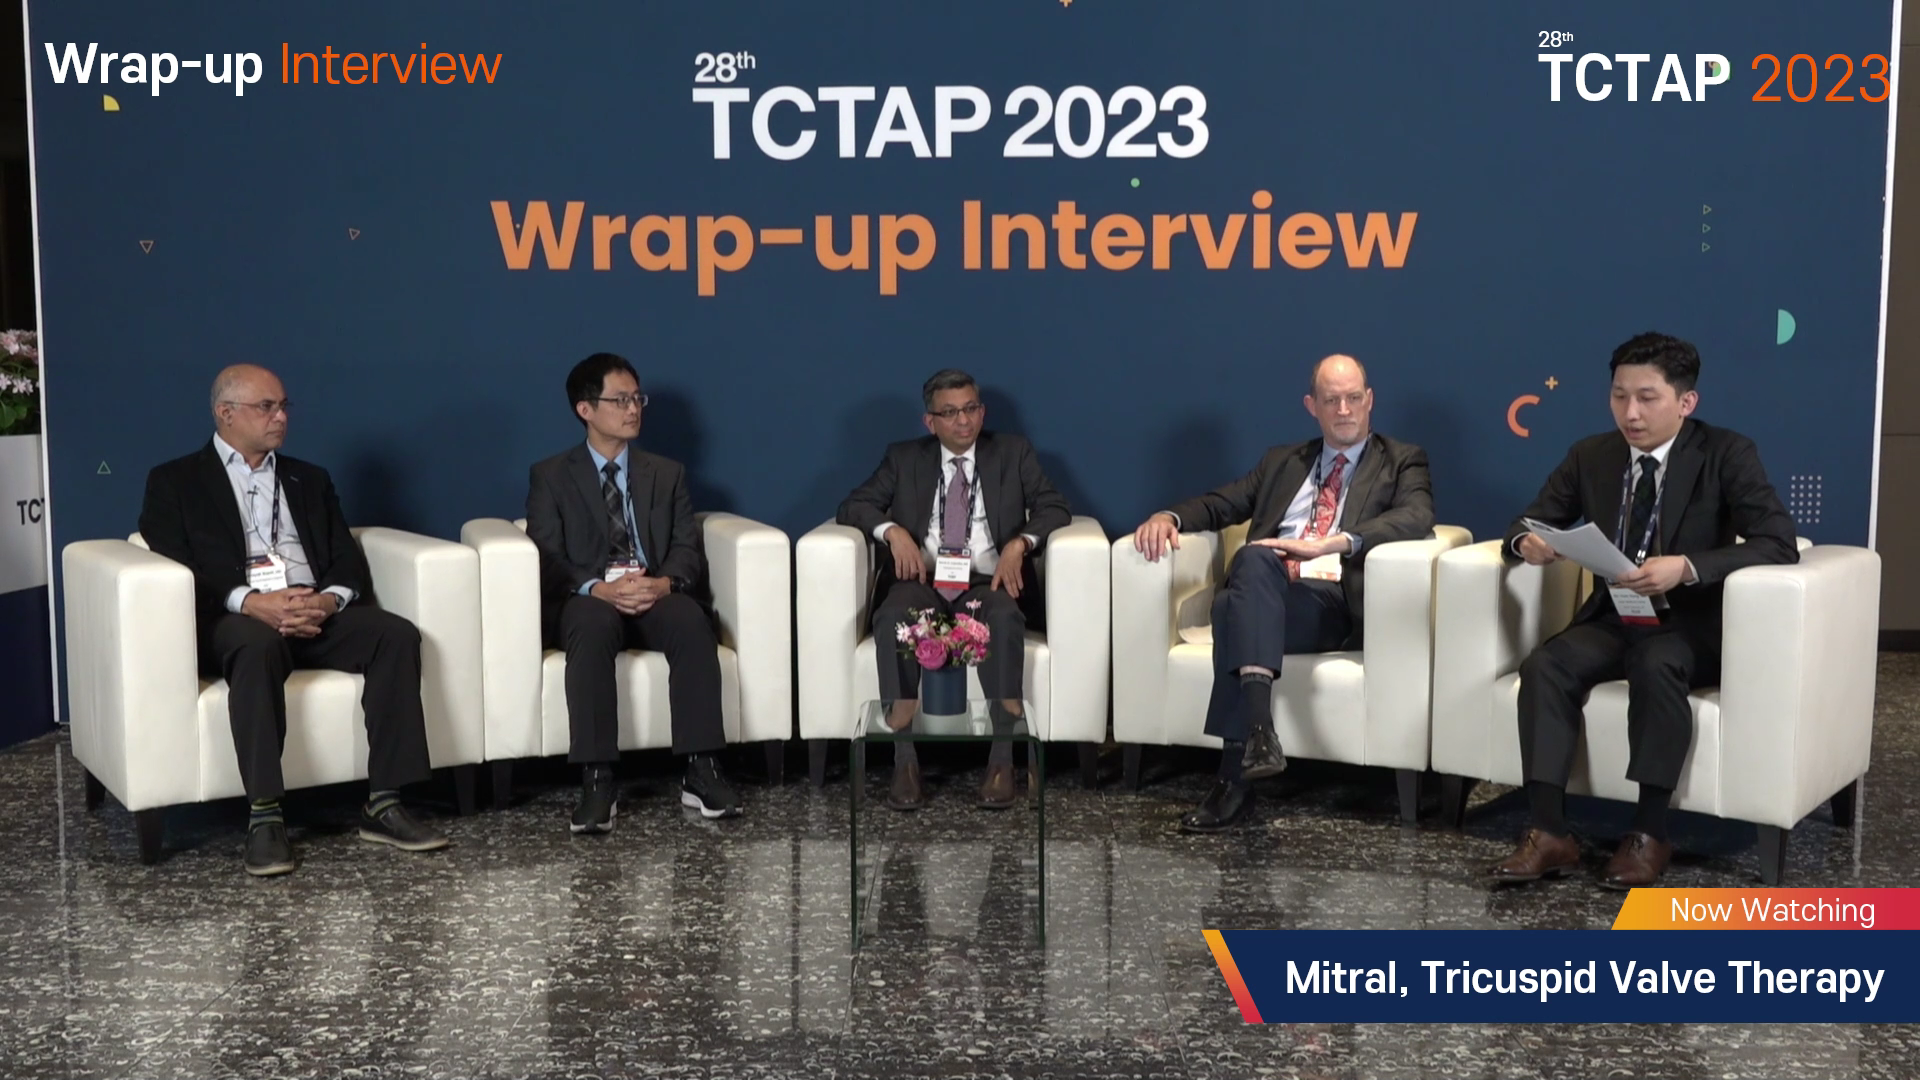 [TCTAP Wrap-up Interviews] Mitral, Tricuspid Valve Therapy